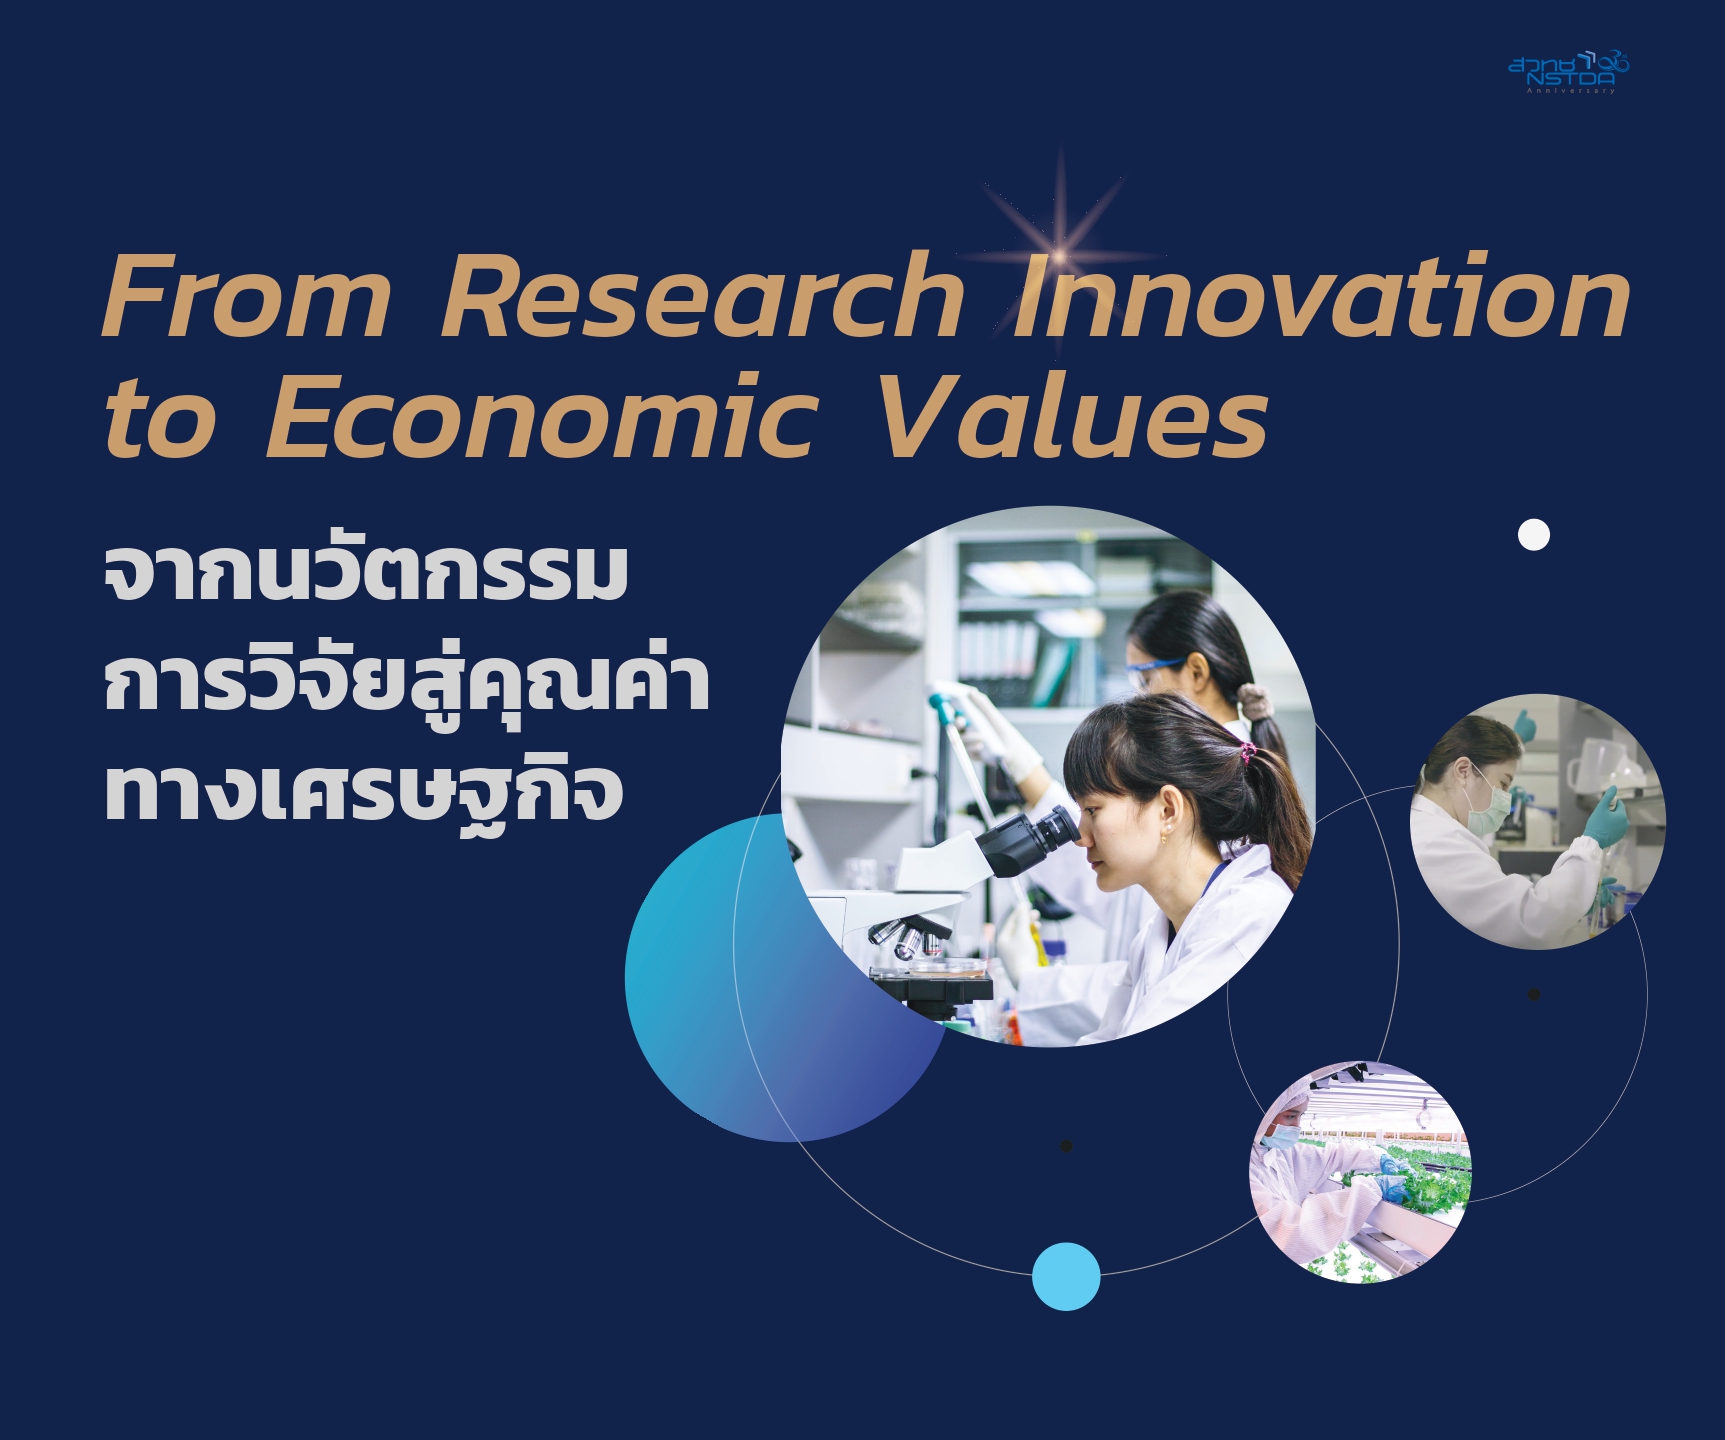 From Research Innovation to Economic Values